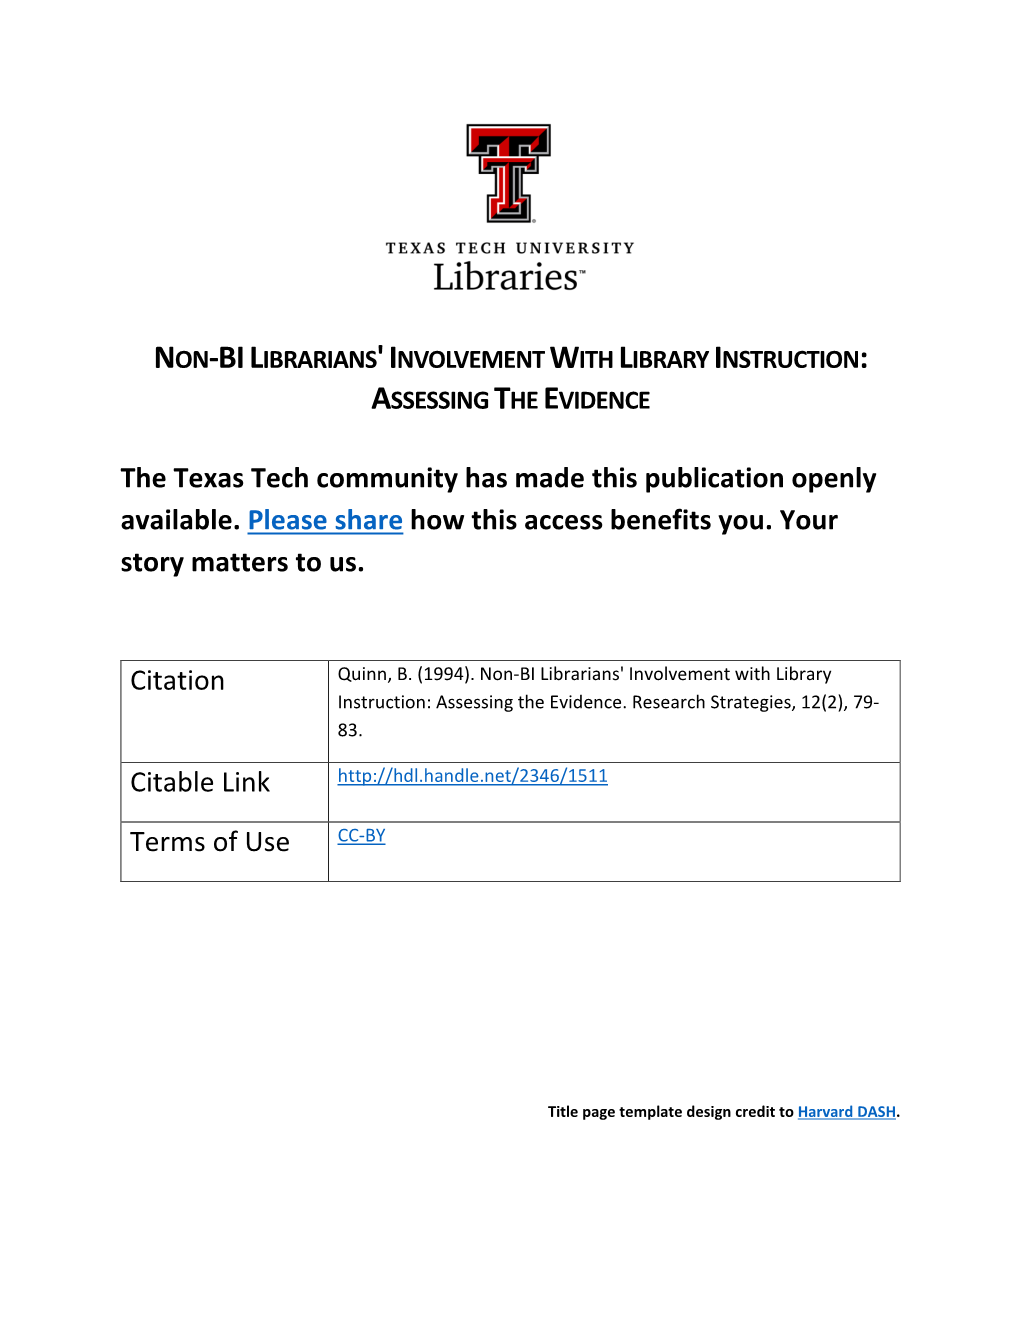 Article with TTU Libraries Cover Page